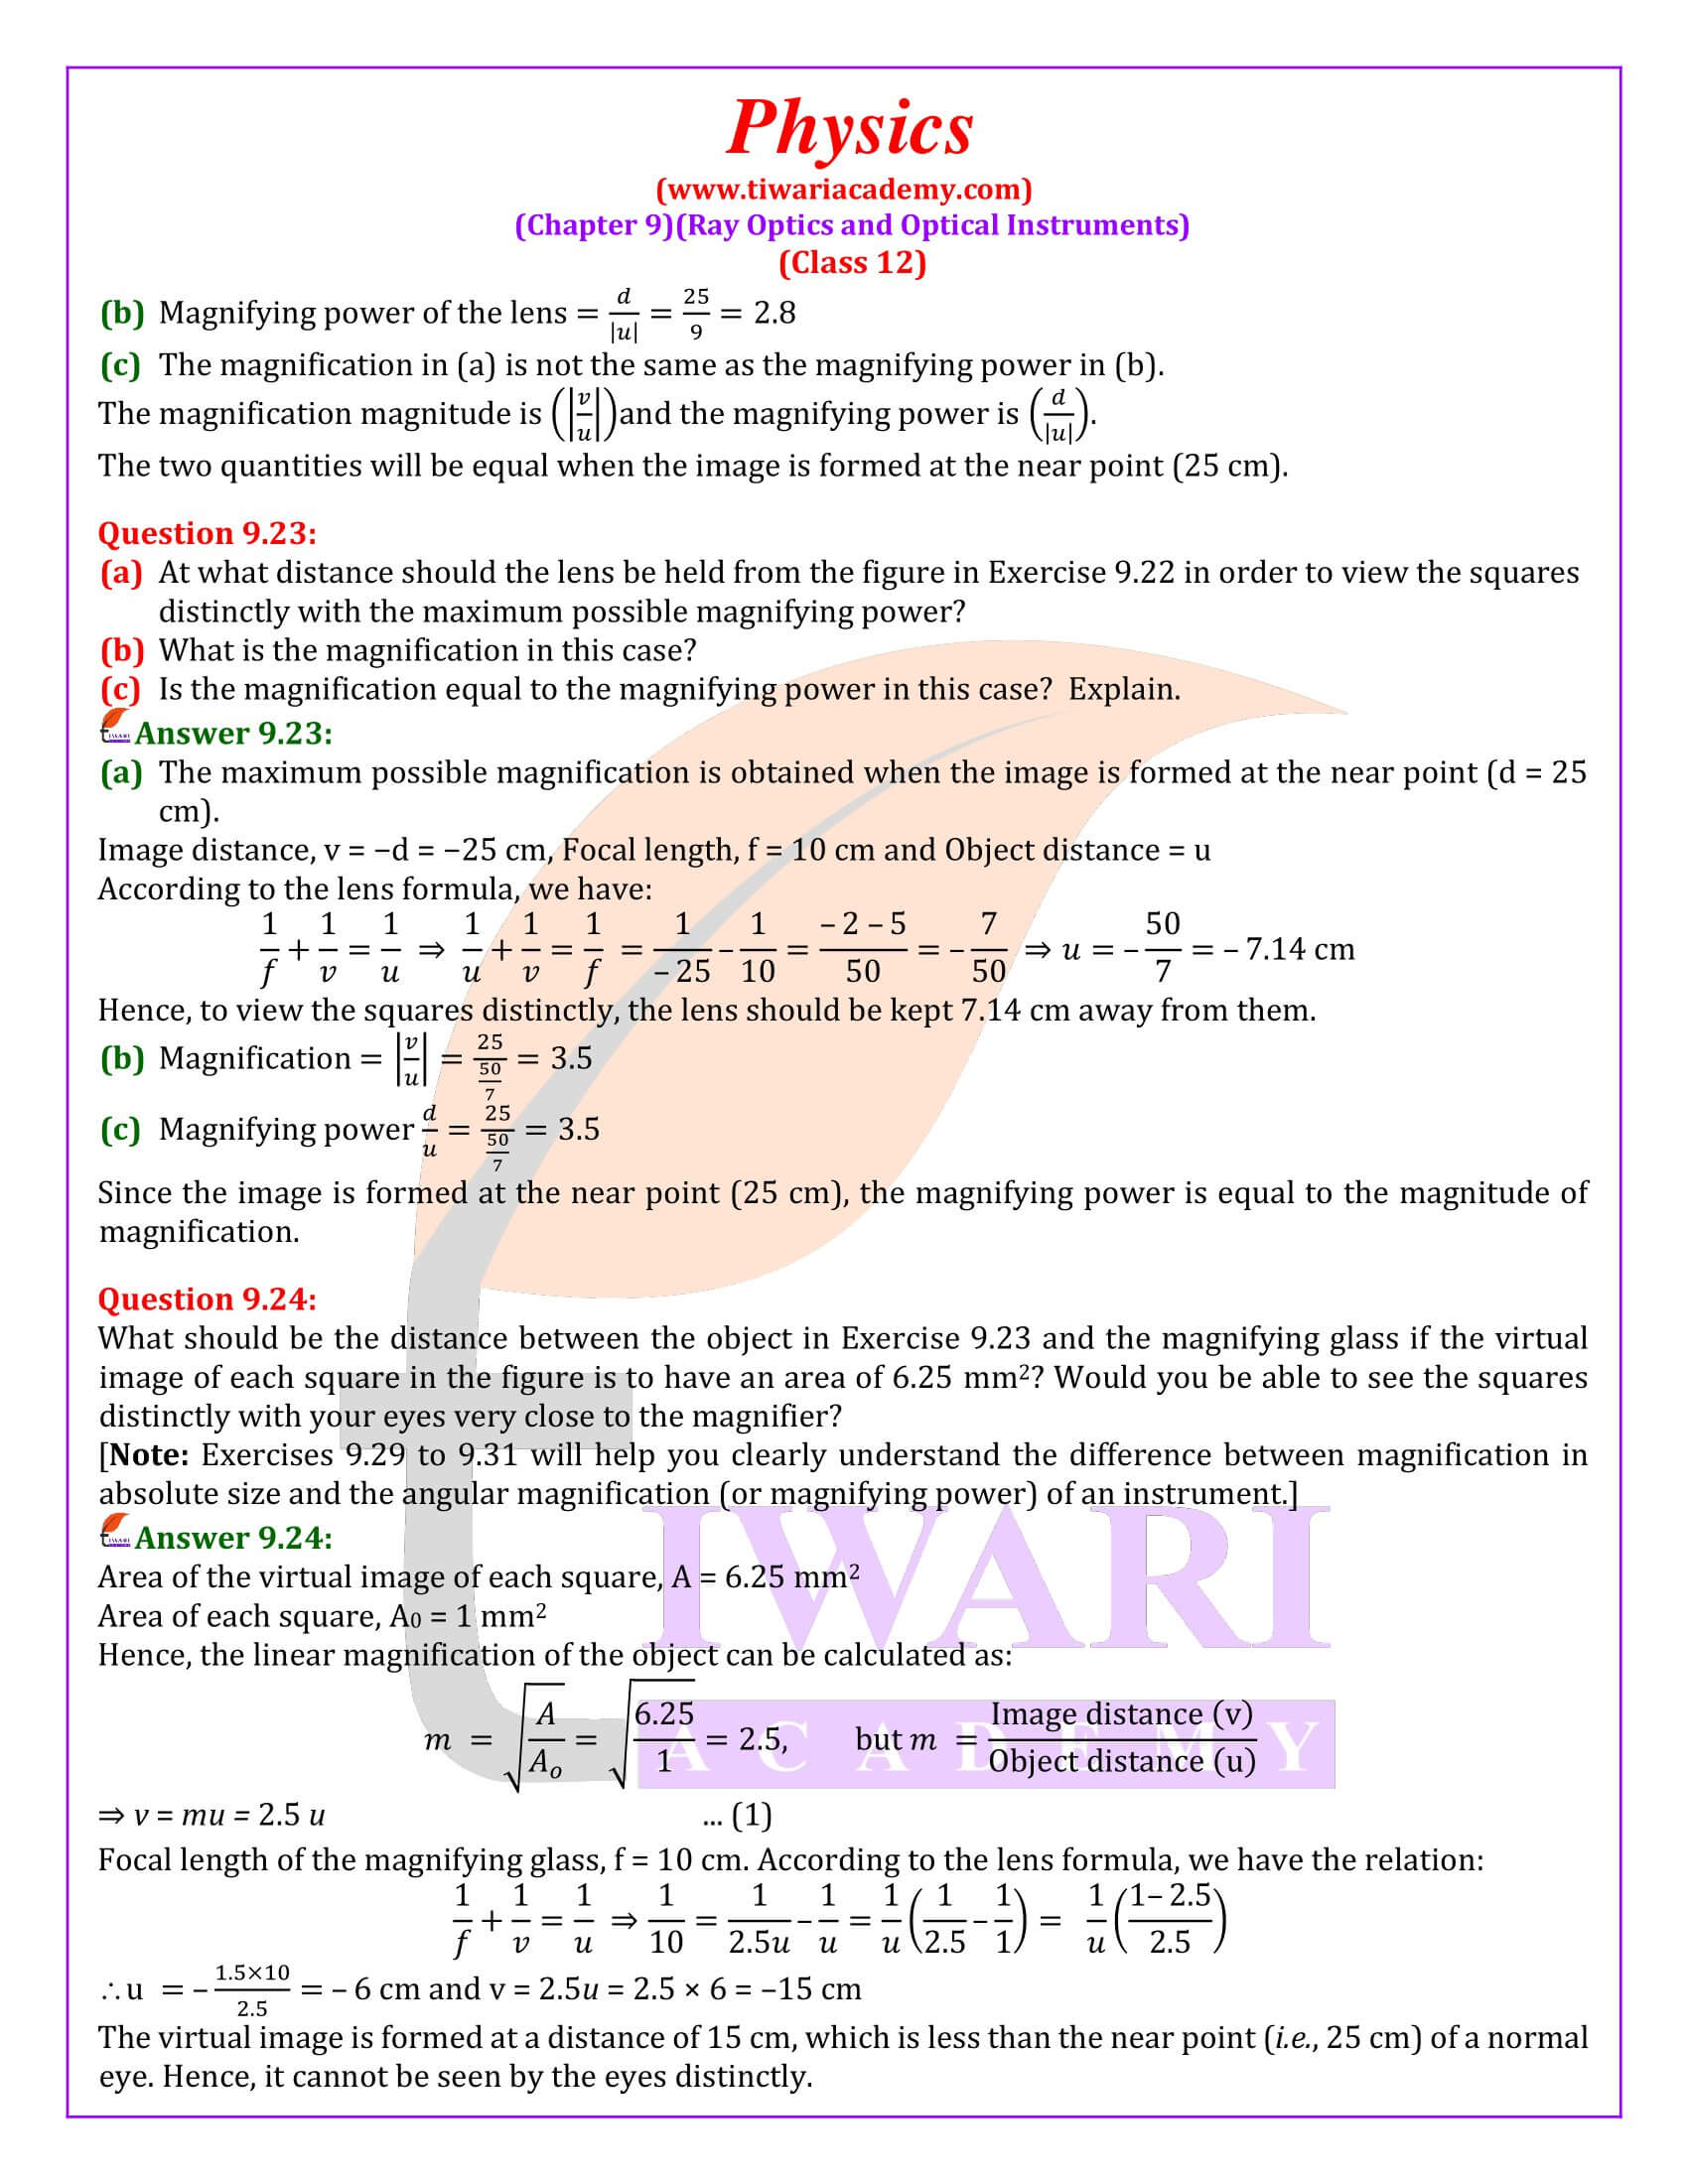 Class 12 Physics Chapter 9 answers